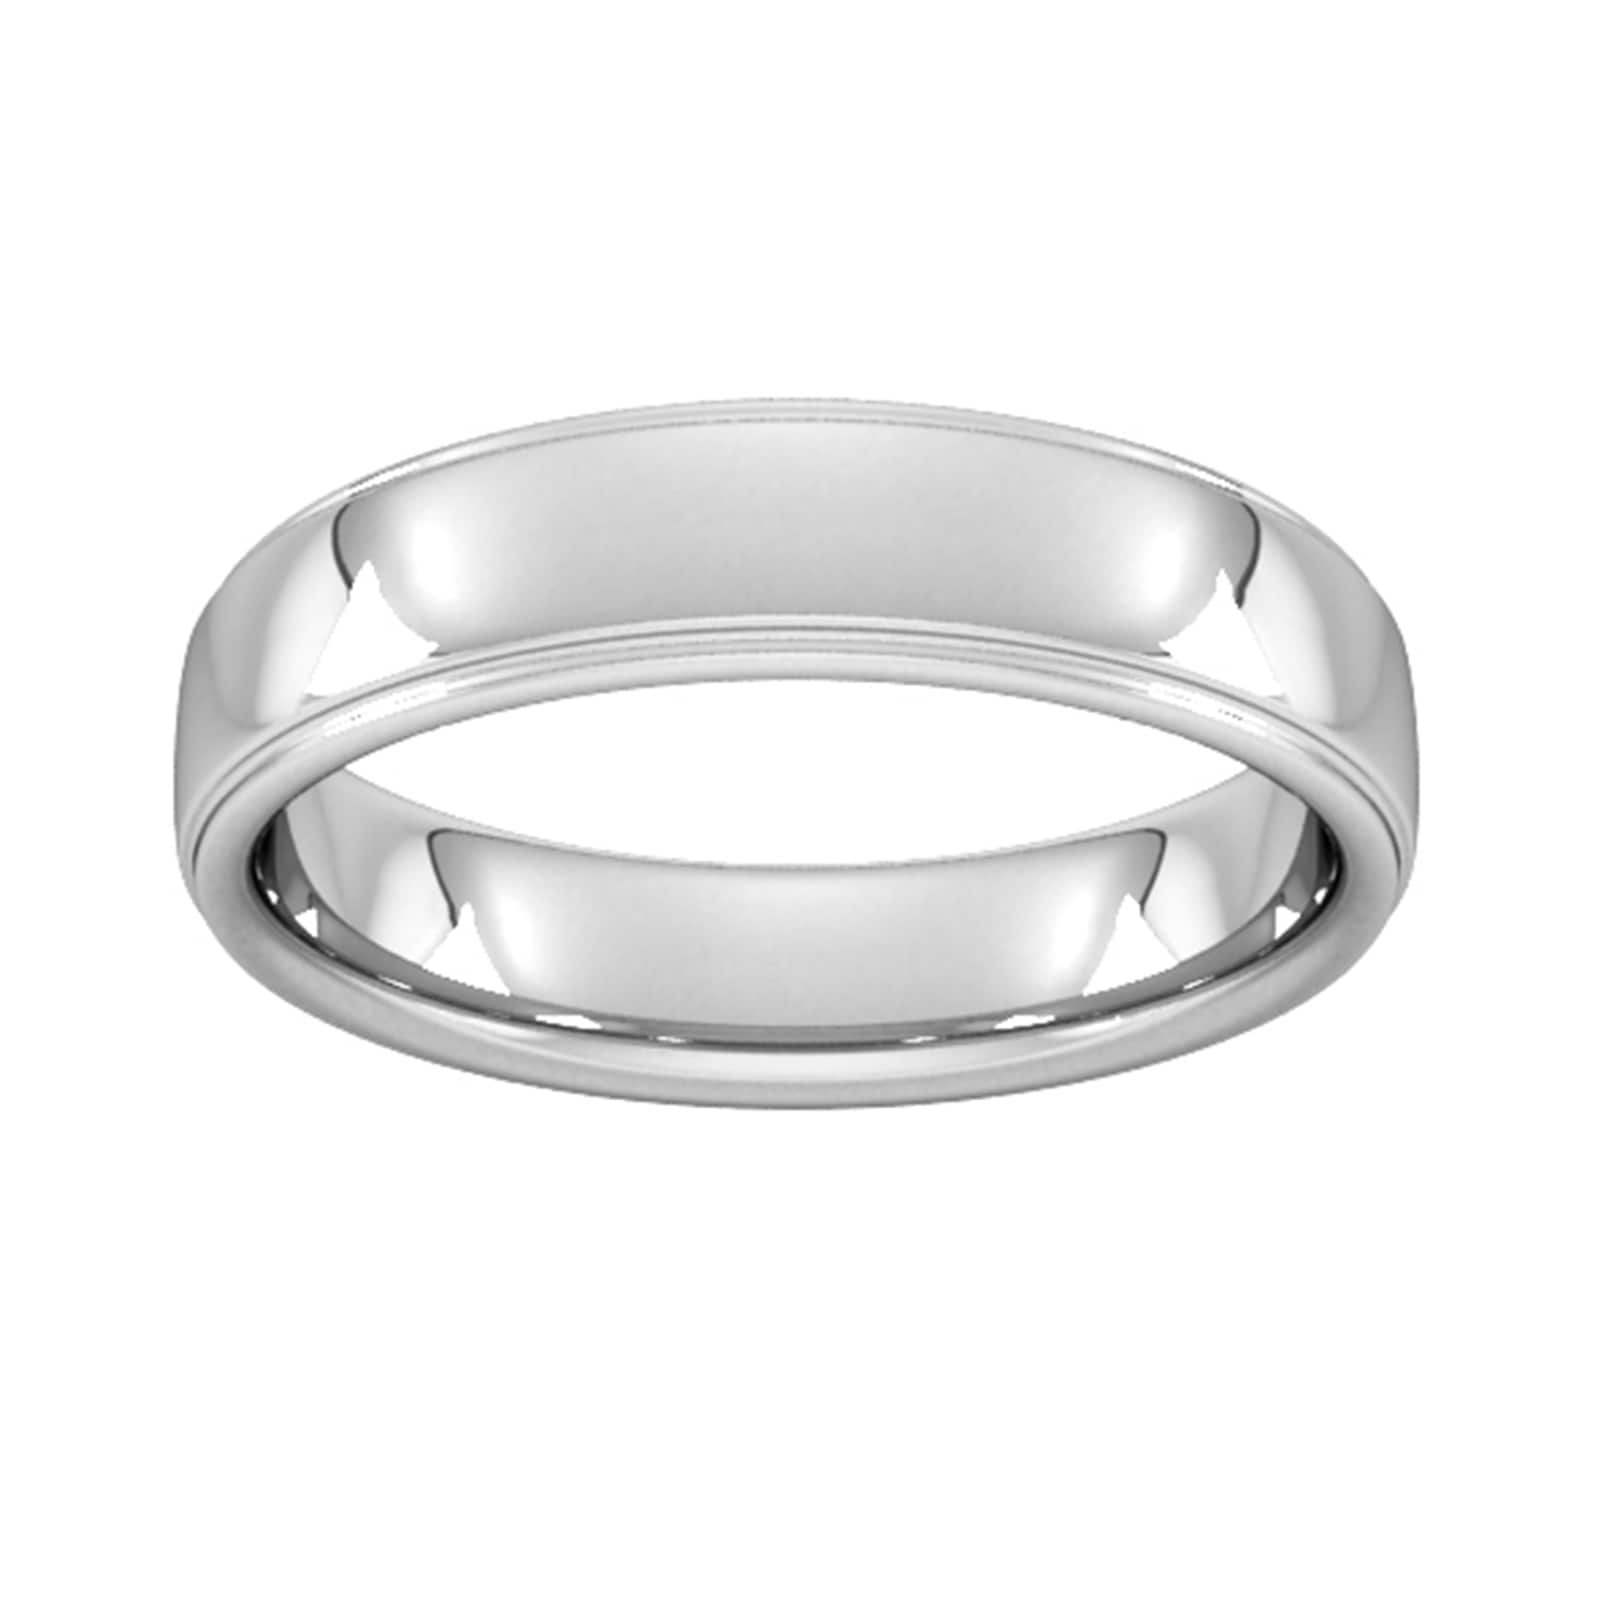 5mm Traditional Court Standard Polished Finish With Grooves Wedding Ring In Platinum - Ring Size Q